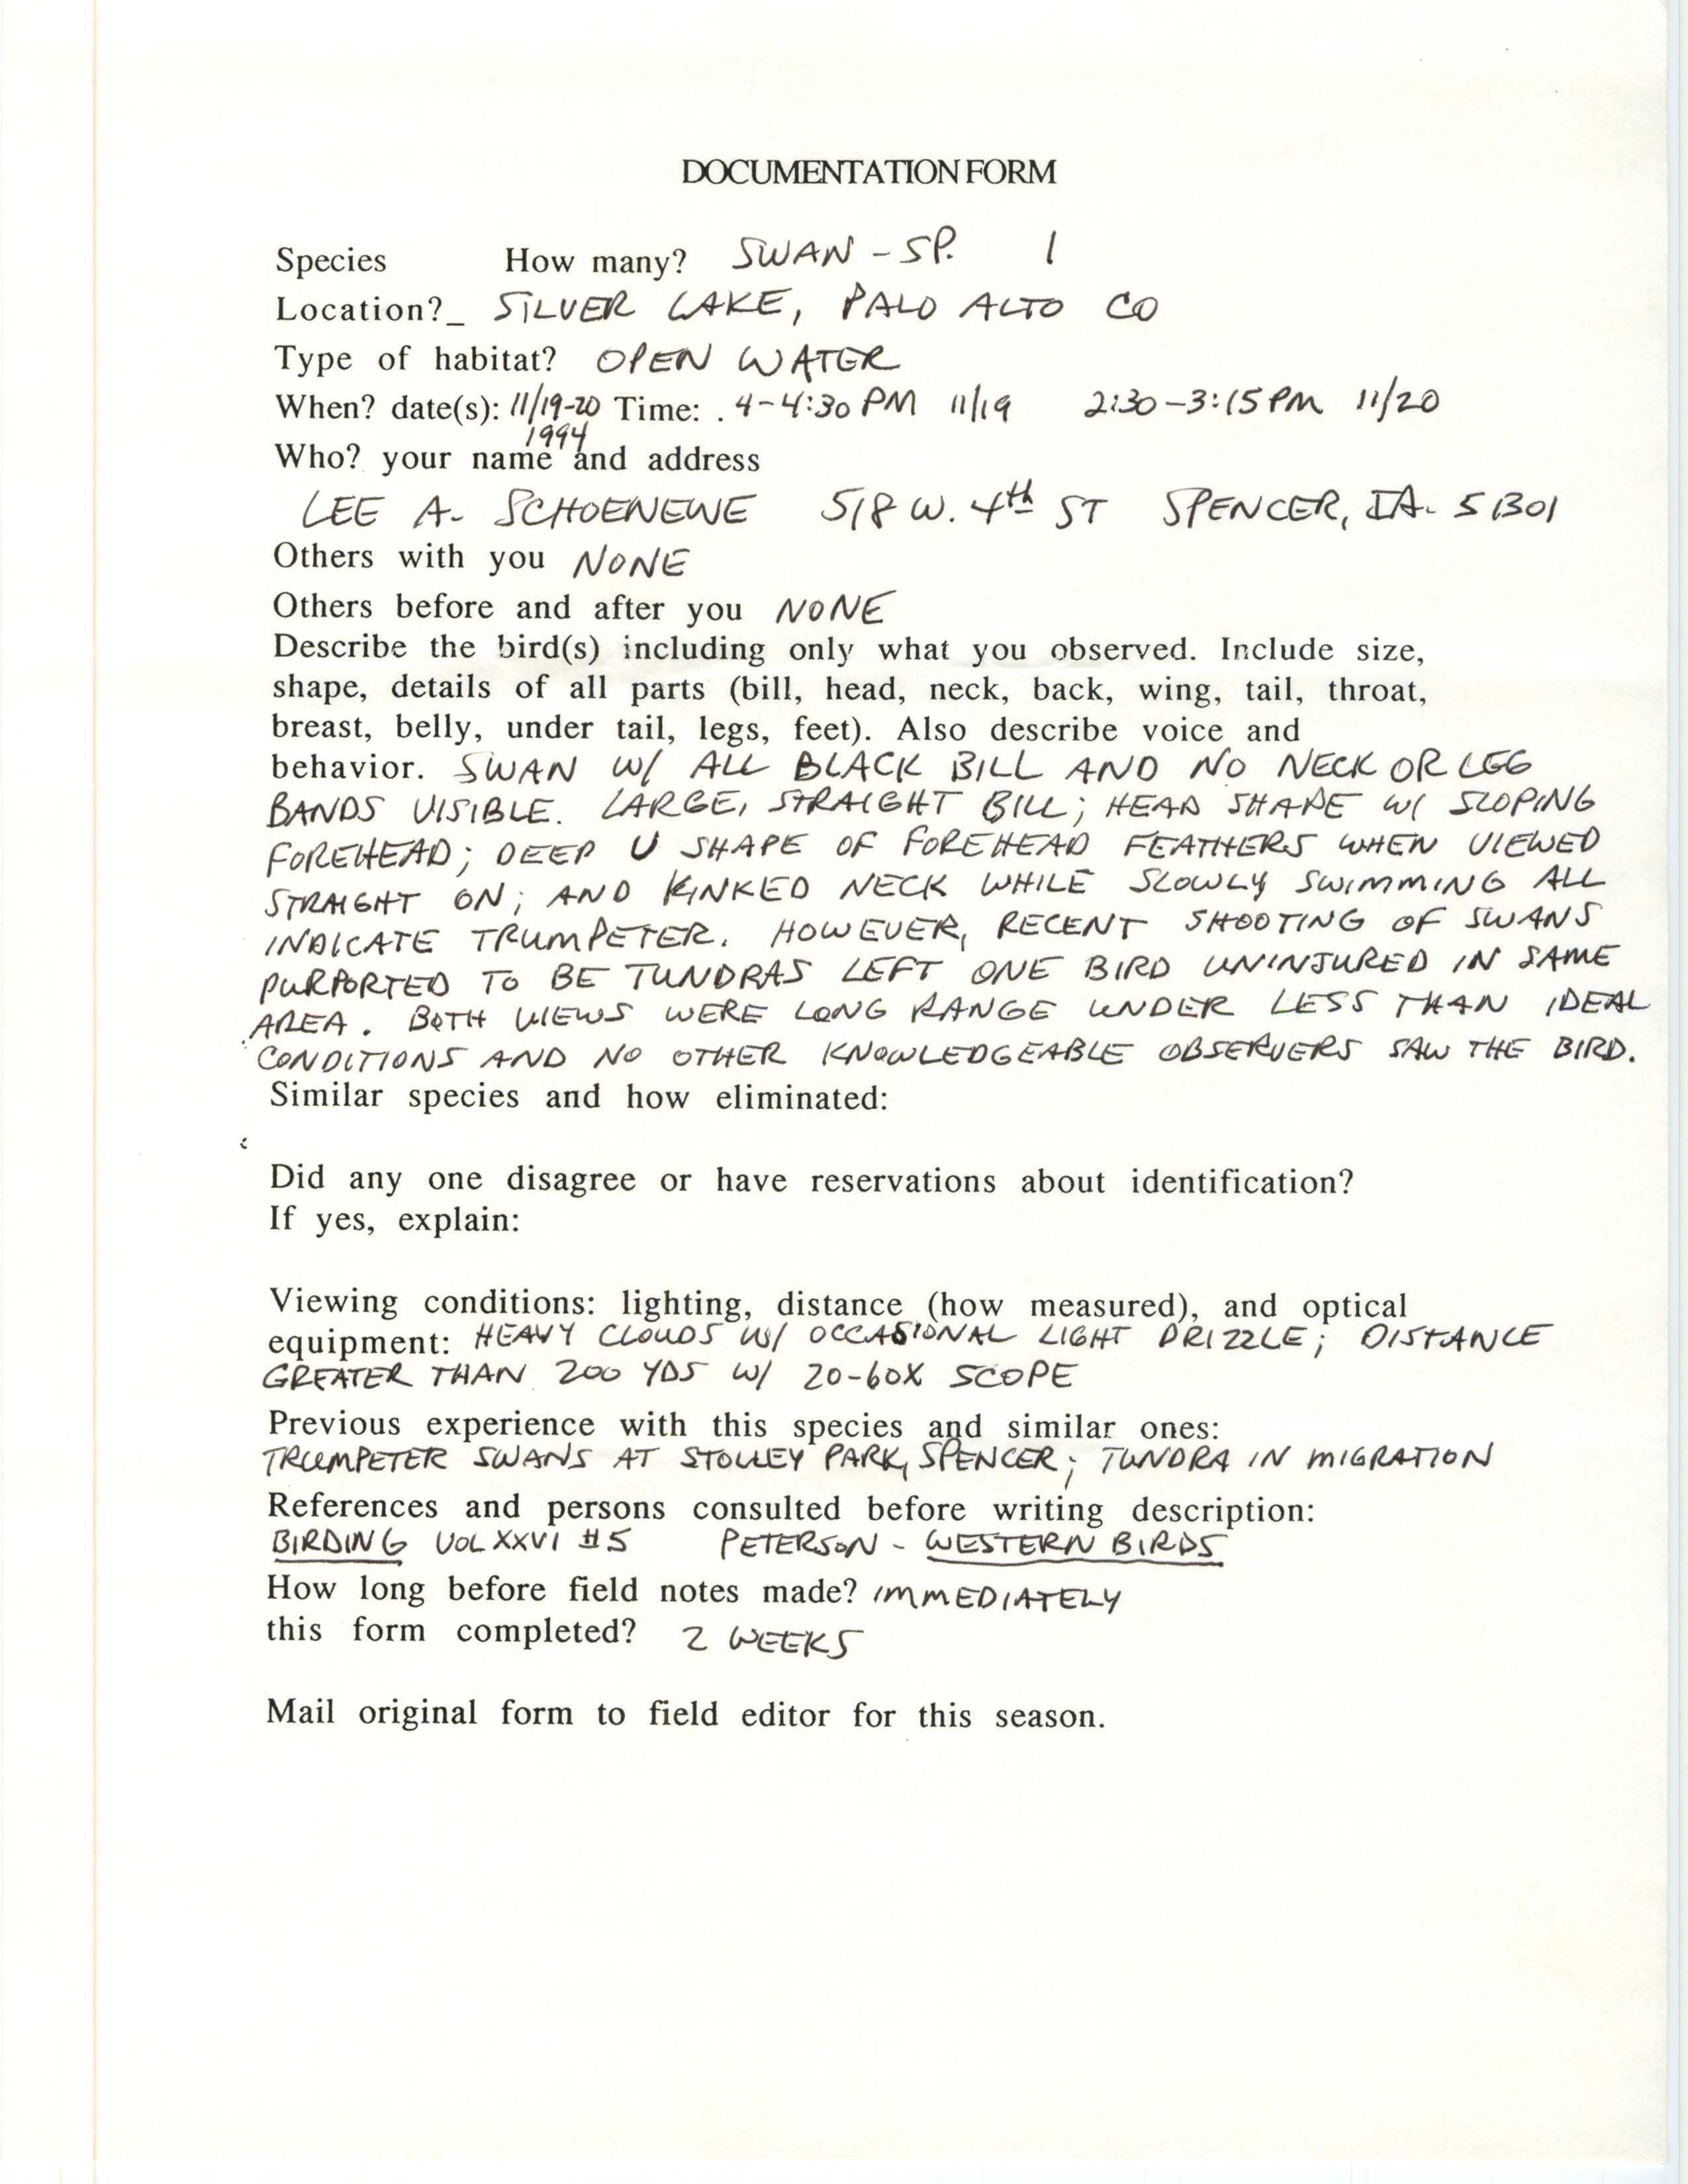 Rare bird documentation form for Swan species at Silver Lake, 1994